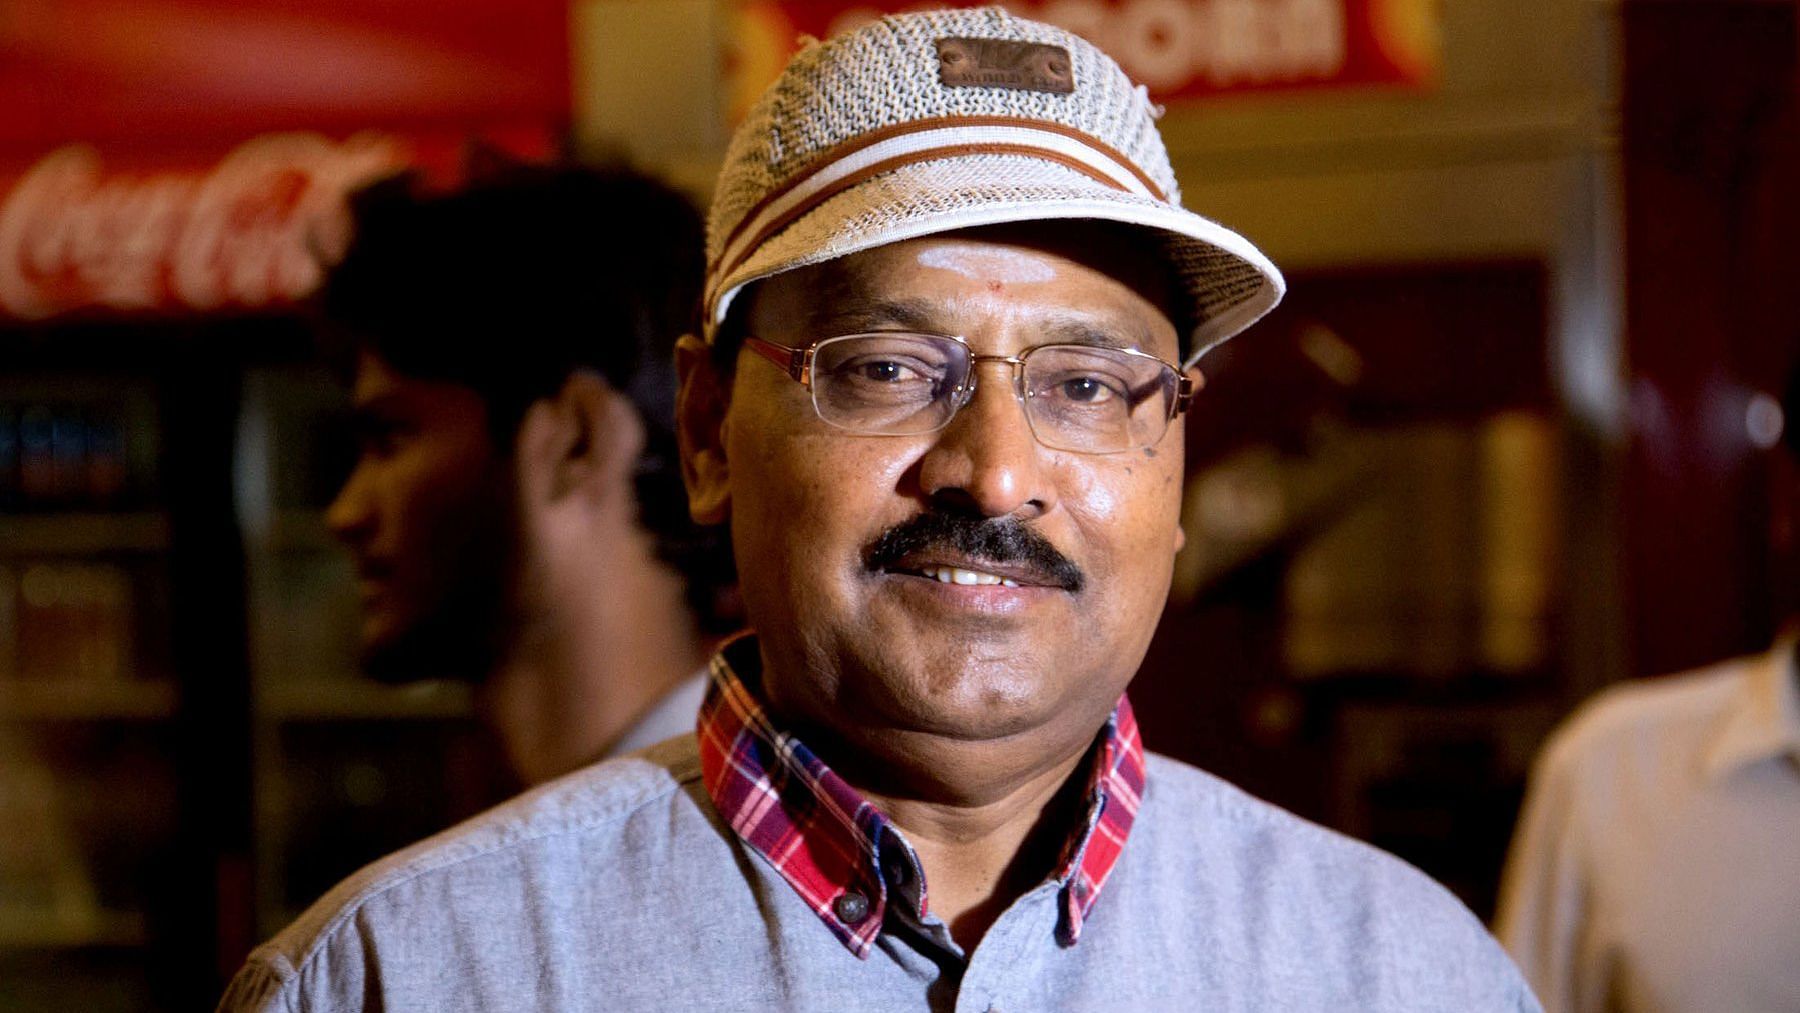 Actor-director Bhagyaraj made a number of misogynistic comments blaming women for ‘being careless’ and ‘letting men use’ them. He bashed women and also justified rape behaviour of men.